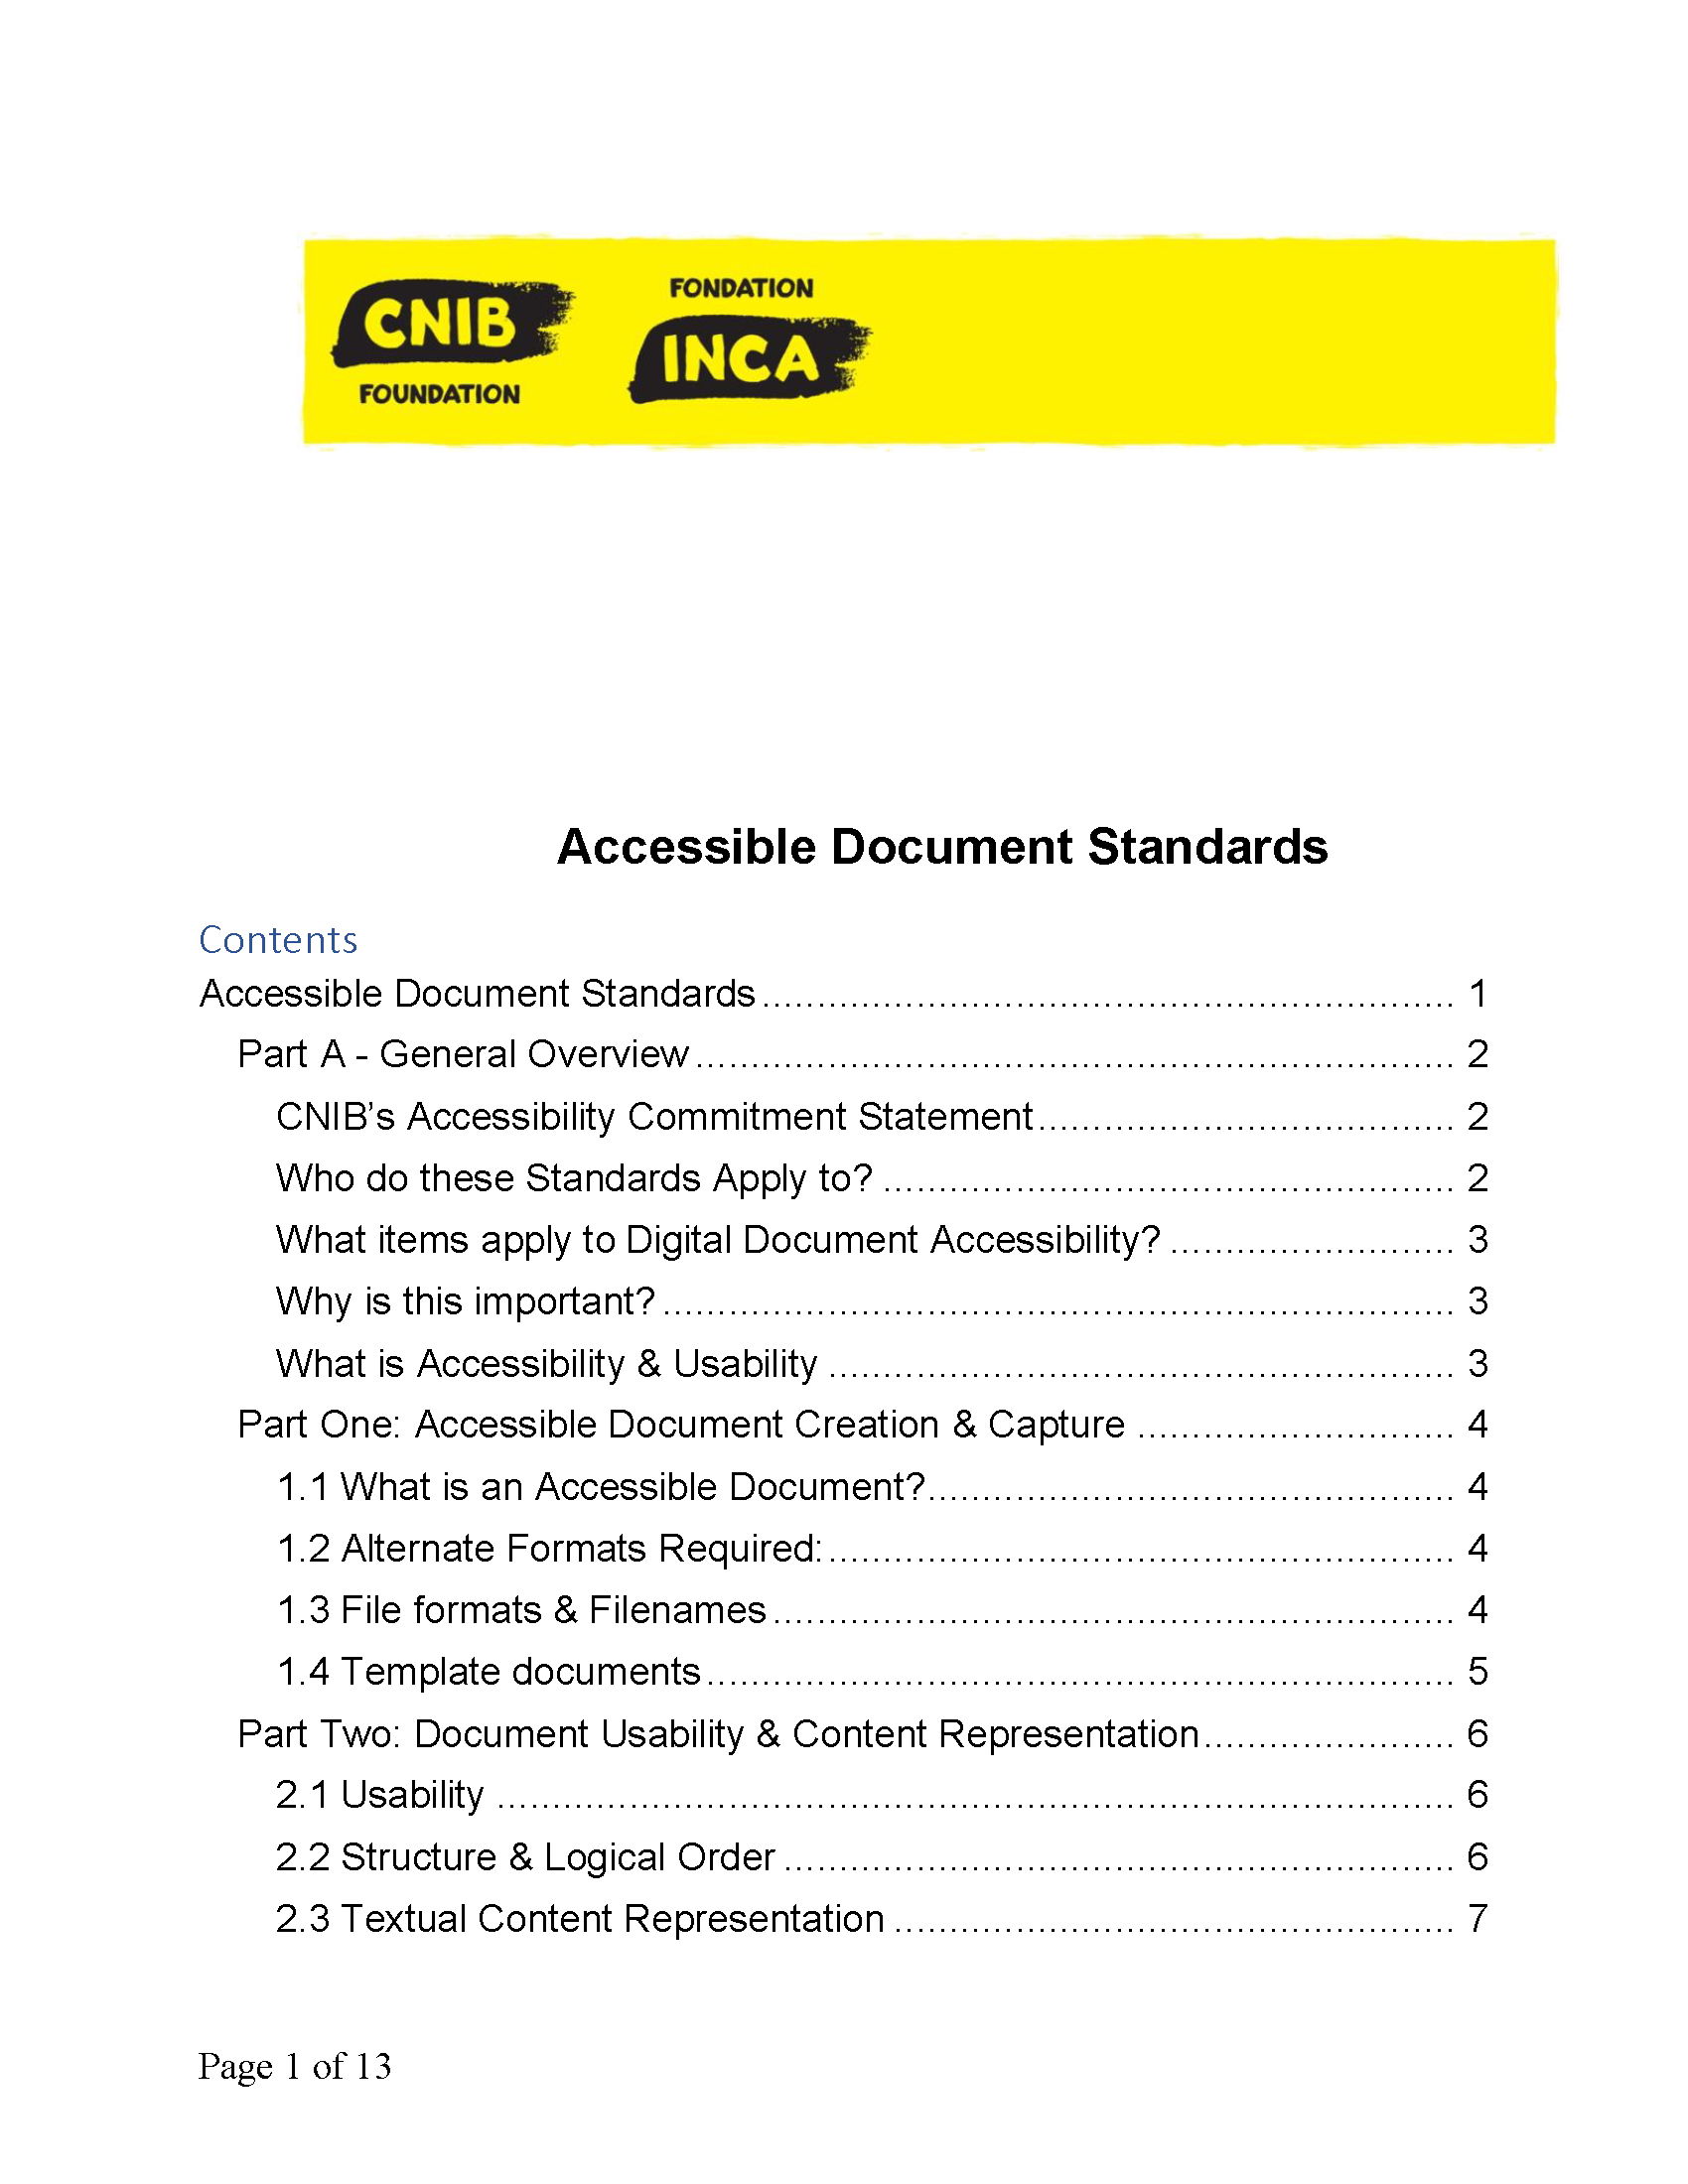 CNIB Accessible Document Standards